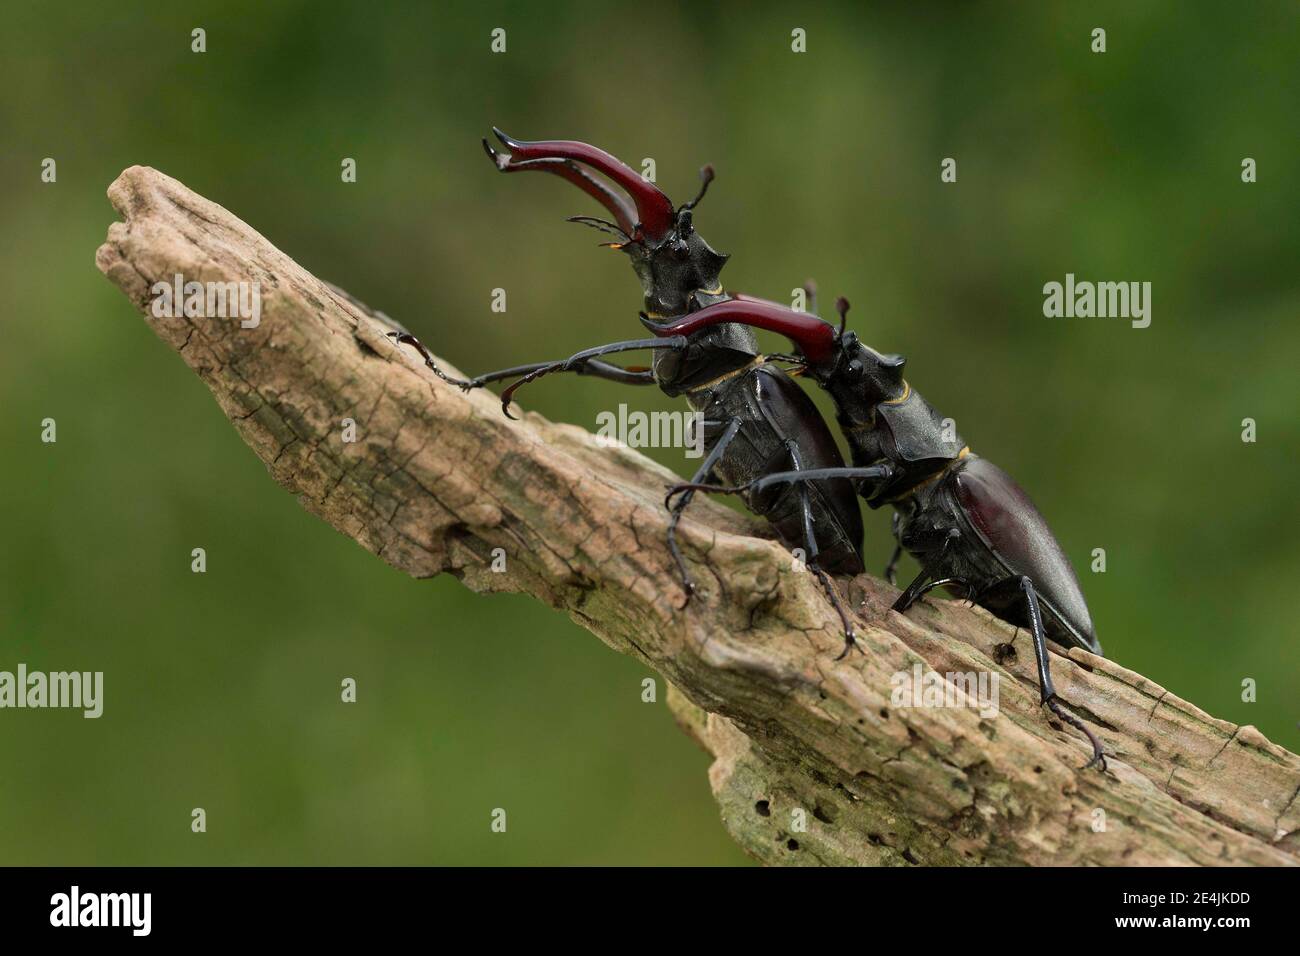 Stag beetle (Lucanus cervus) two males with antler-like enlarged mandibles in a comment fight, largest and most conspicuous beetle in Europe Stock Photo